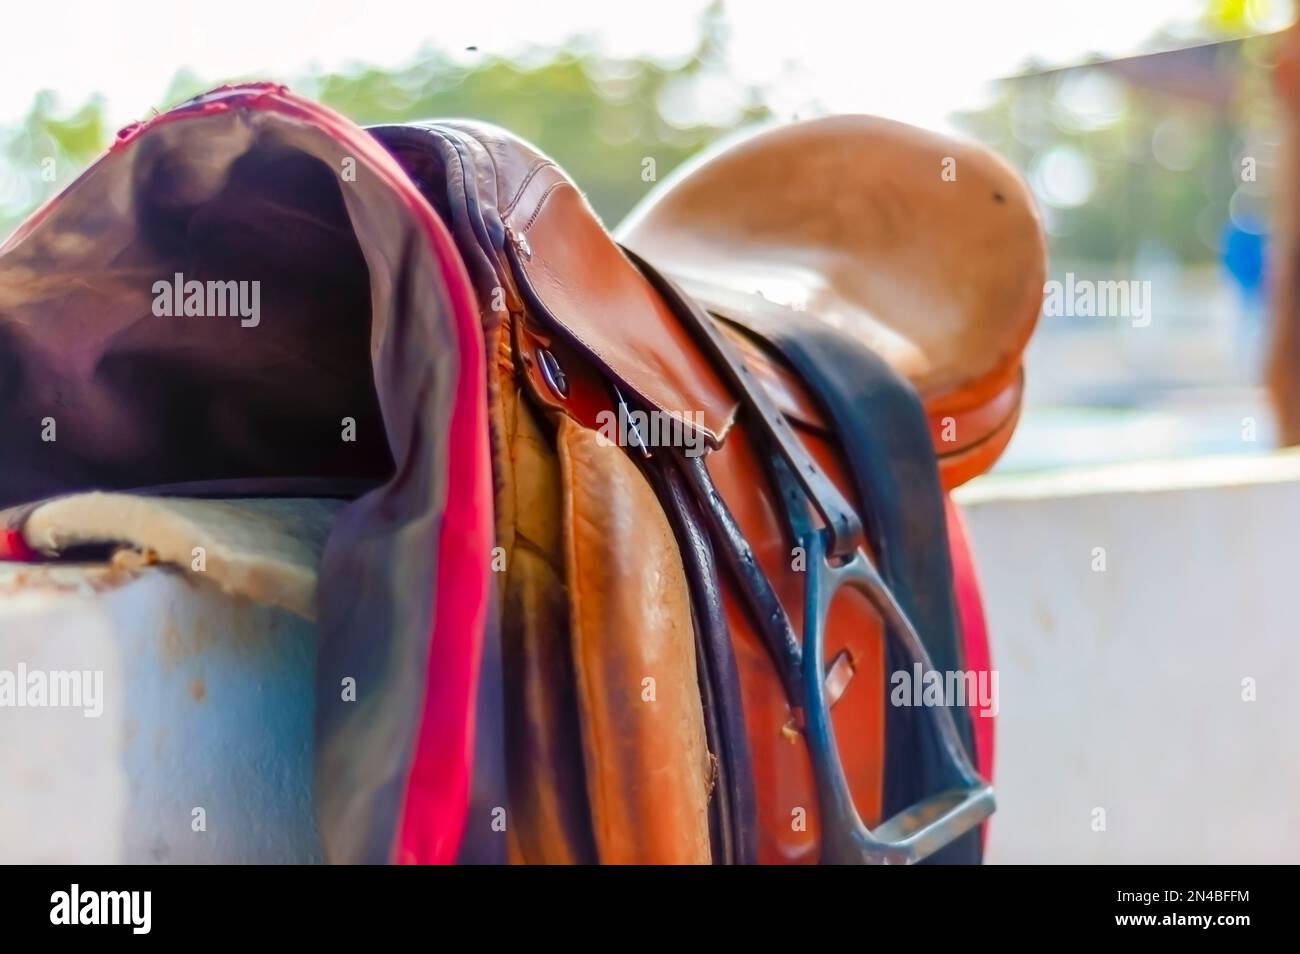 A saddle for riding a horse. Stock Photo